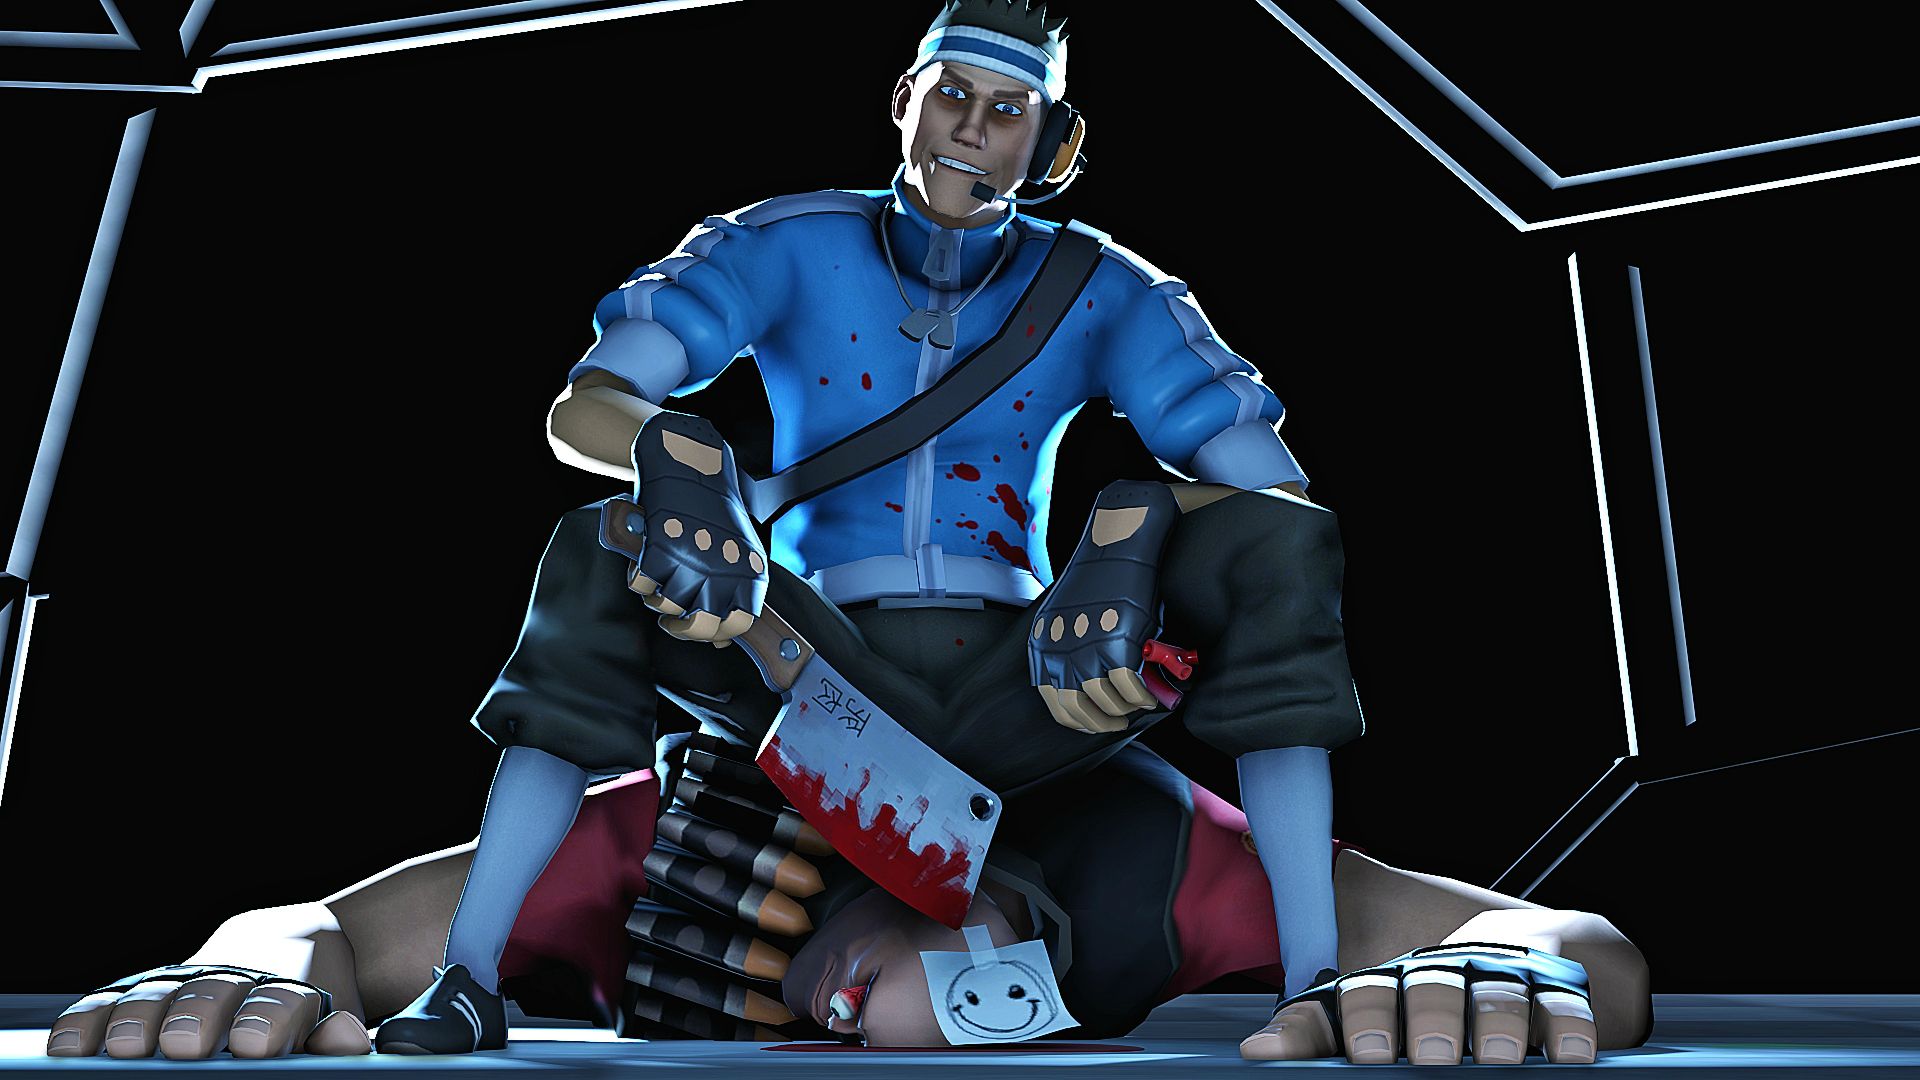 tf2 scout wallpaper,sports gear,player,games,personal protective equipment,competition event